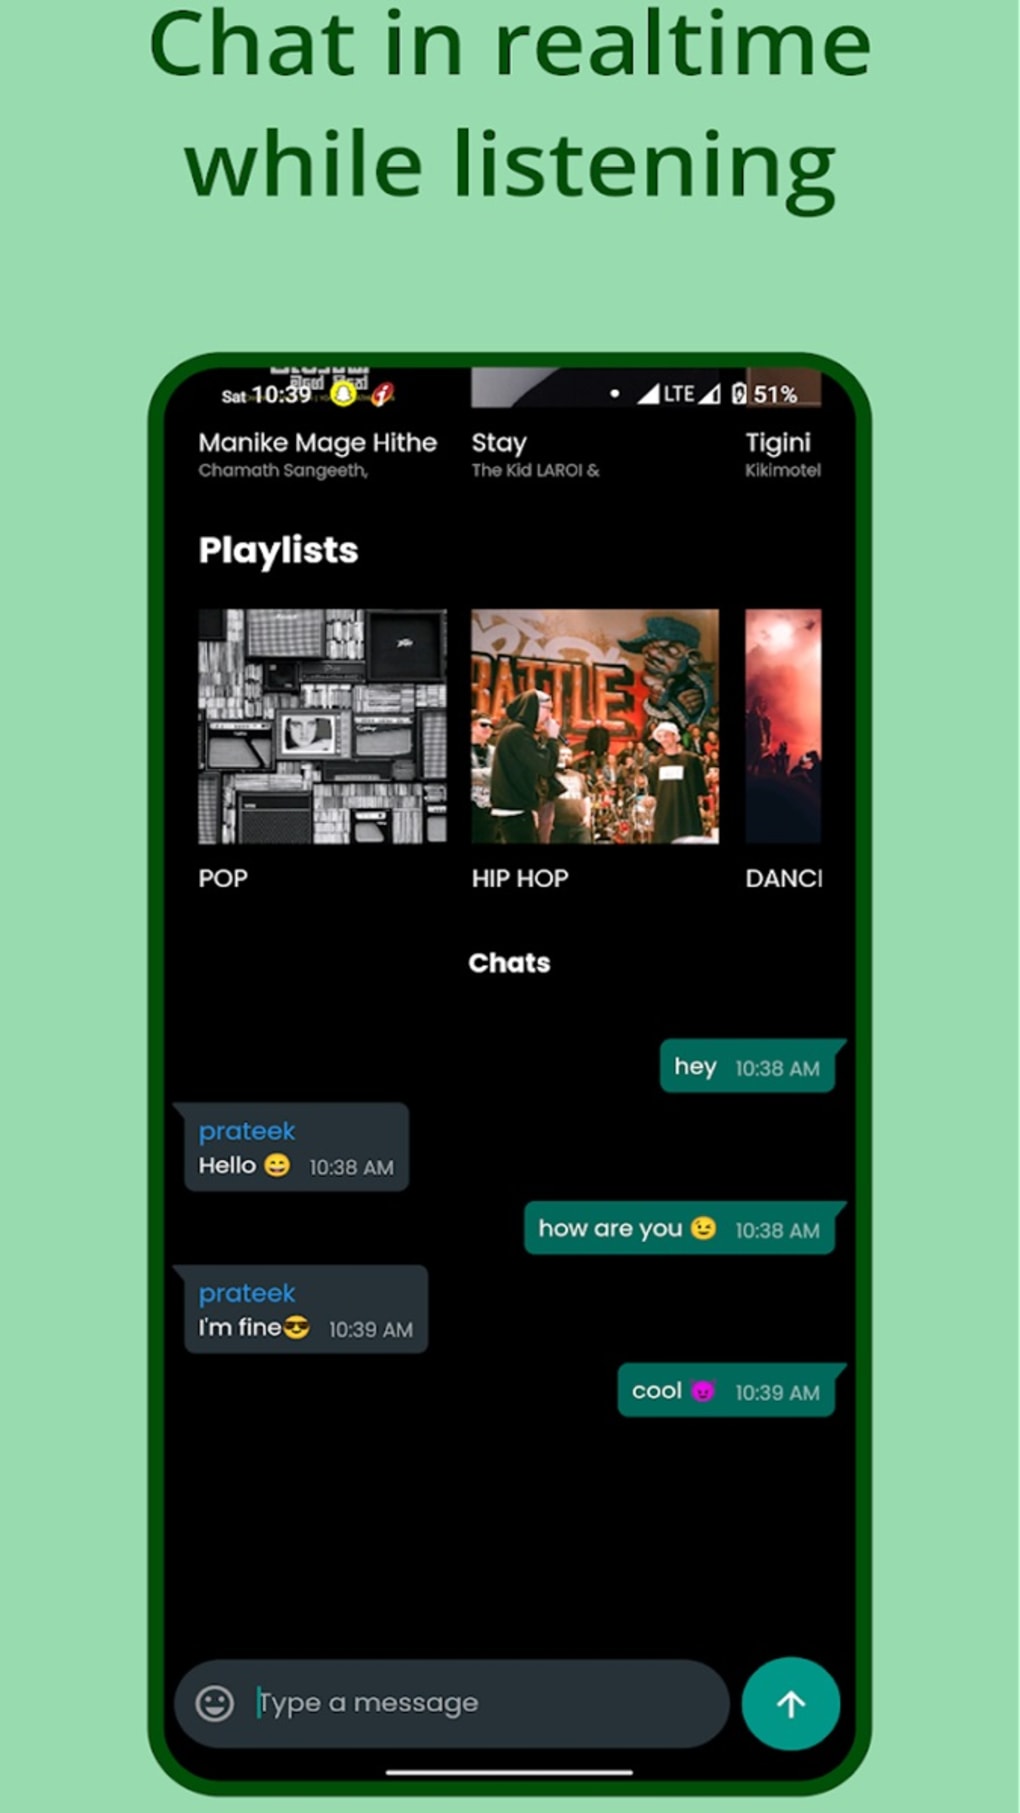 Download the Music Together App